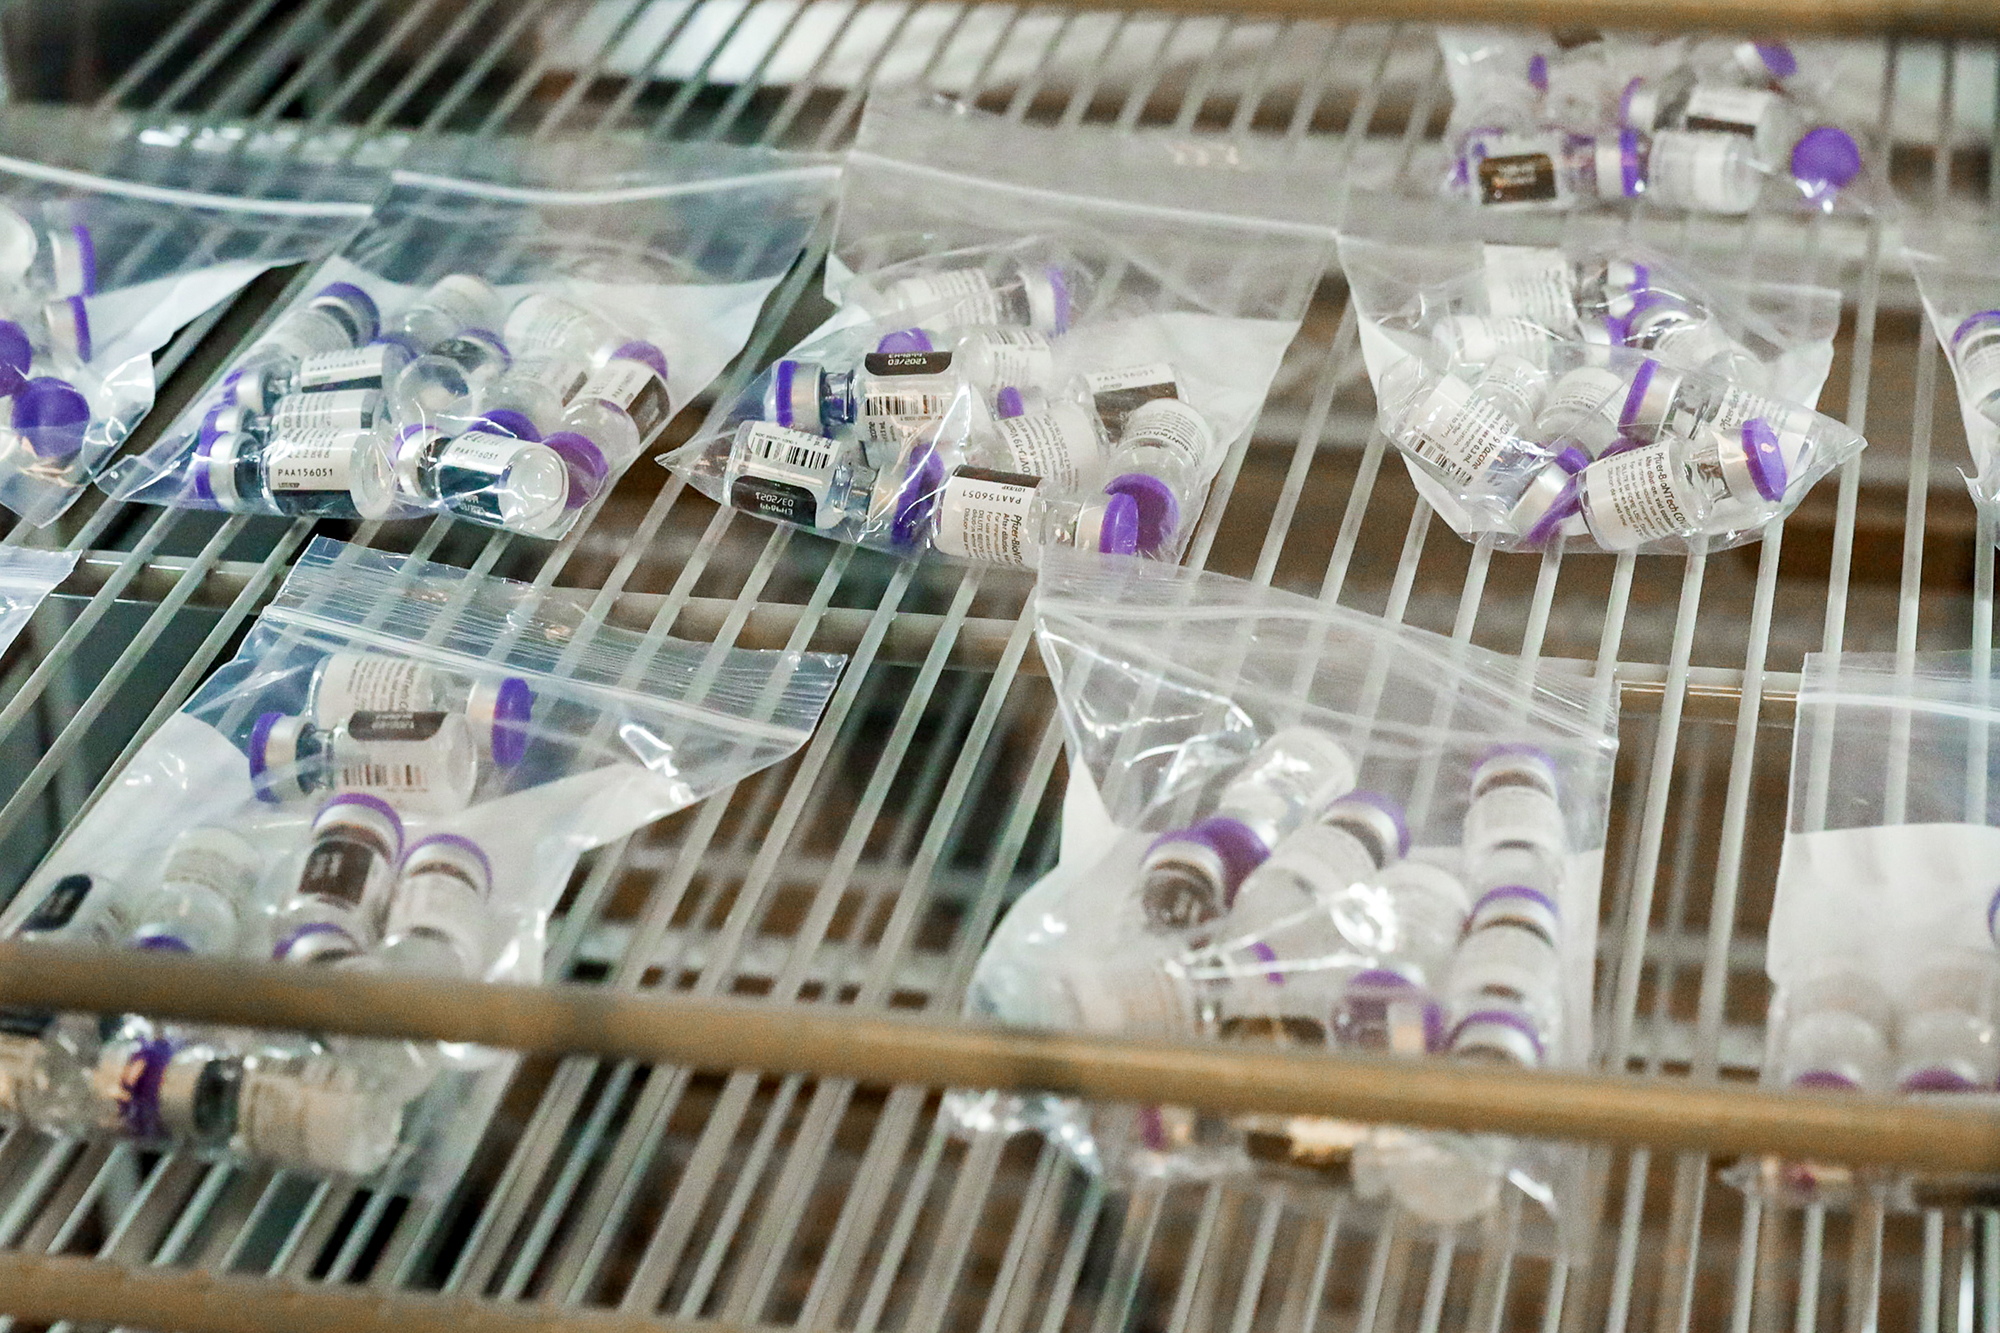 Plastic bags full of several vials of COVID vaccine lay on shelves in a refrigerator.